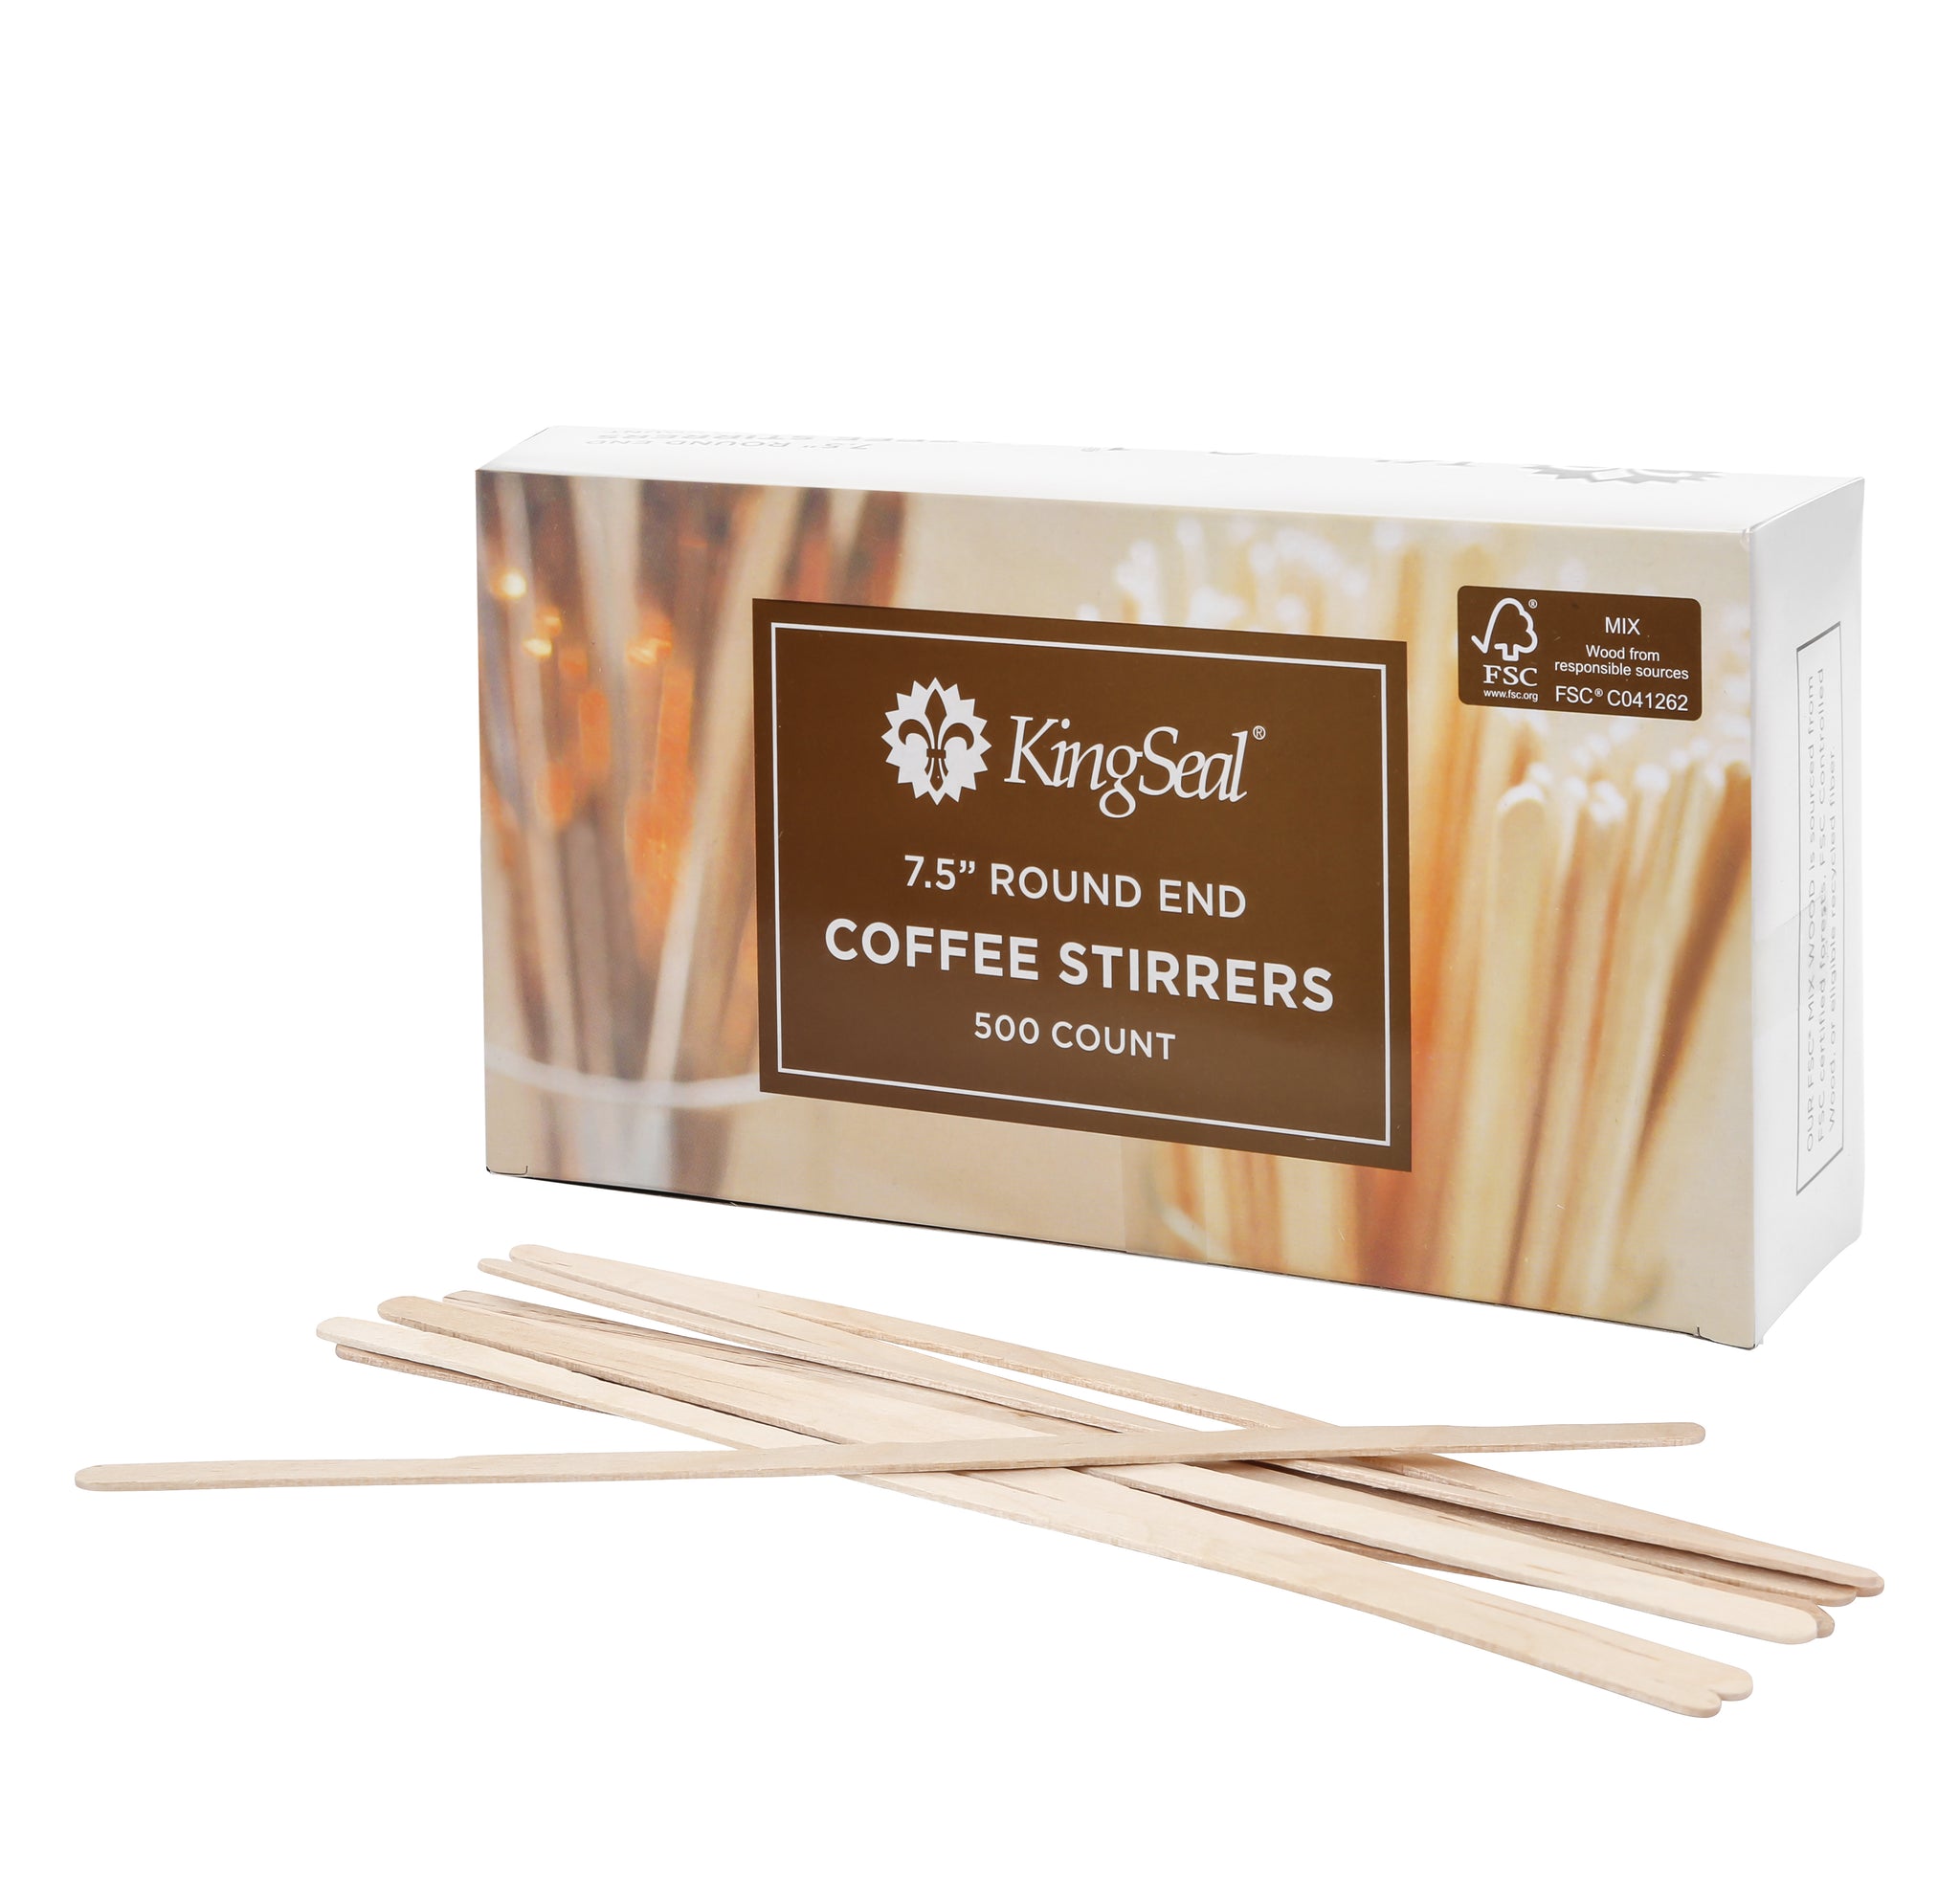 Fill 'n Brew Wood Coffee Stirrers, 150 count